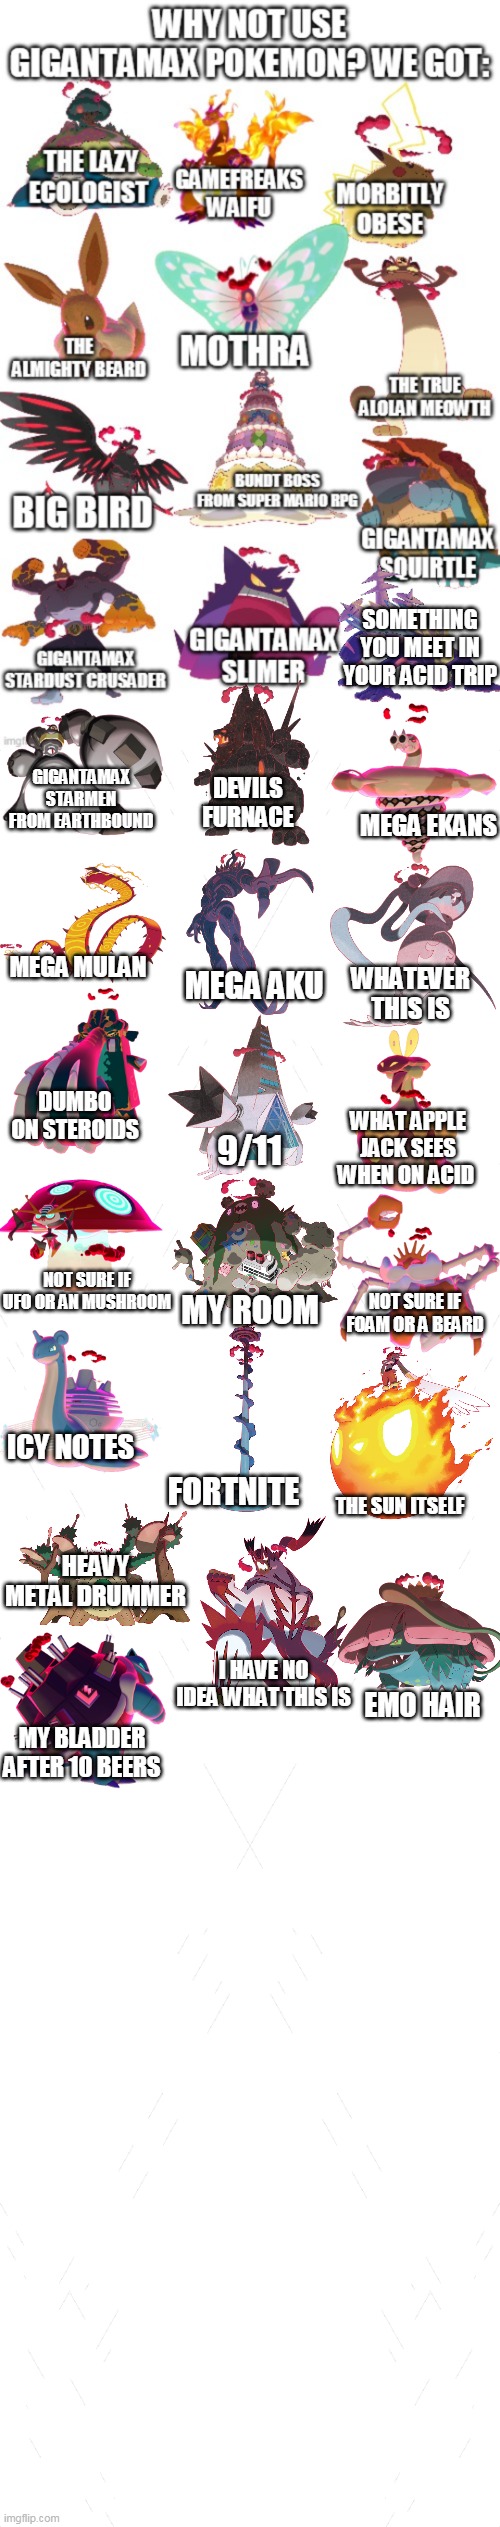 gigantamax pokemon be like | SOMETHING YOU MEET IN YOUR ACID TRIP; GIGANTAMAX STARMEN FROM EARTHBOUND; DEVILS FURNACE; MEGA EKANS; MEGA MULAN; MEGA AKU; WHATEVER THIS IS; DUMBO ON STEROIDS; WHAT APPLE JACK SEES WHEN ON ACID; 9/11; NOT SURE IF UFO OR AN MUSHROOM; NOT SURE IF FOAM OR A BEARD; MY ROOM; ICY NOTES; FORTNITE; THE SUN ITSELF; HEAVY METAL DRUMMER; I HAVE NO IDEA WHAT THIS IS; EMO HAIR; MY BLADDER AFTER 10 BEERS | image tagged in memes,funny,pokemon | made w/ Imgflip meme maker